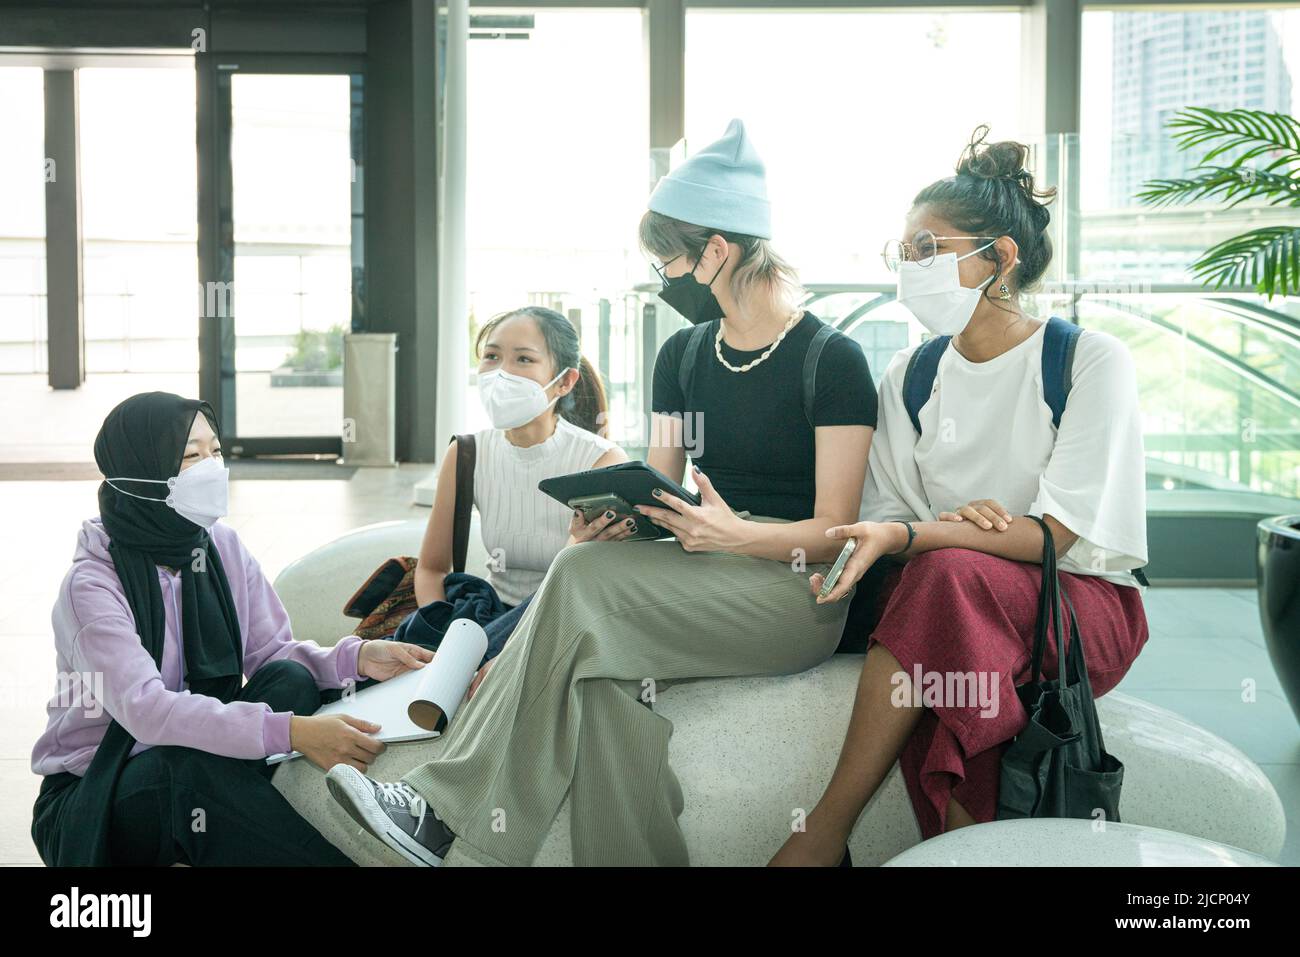 Group of multi-racial young women wearing face mask sitting and hanging out together. Stock Photo